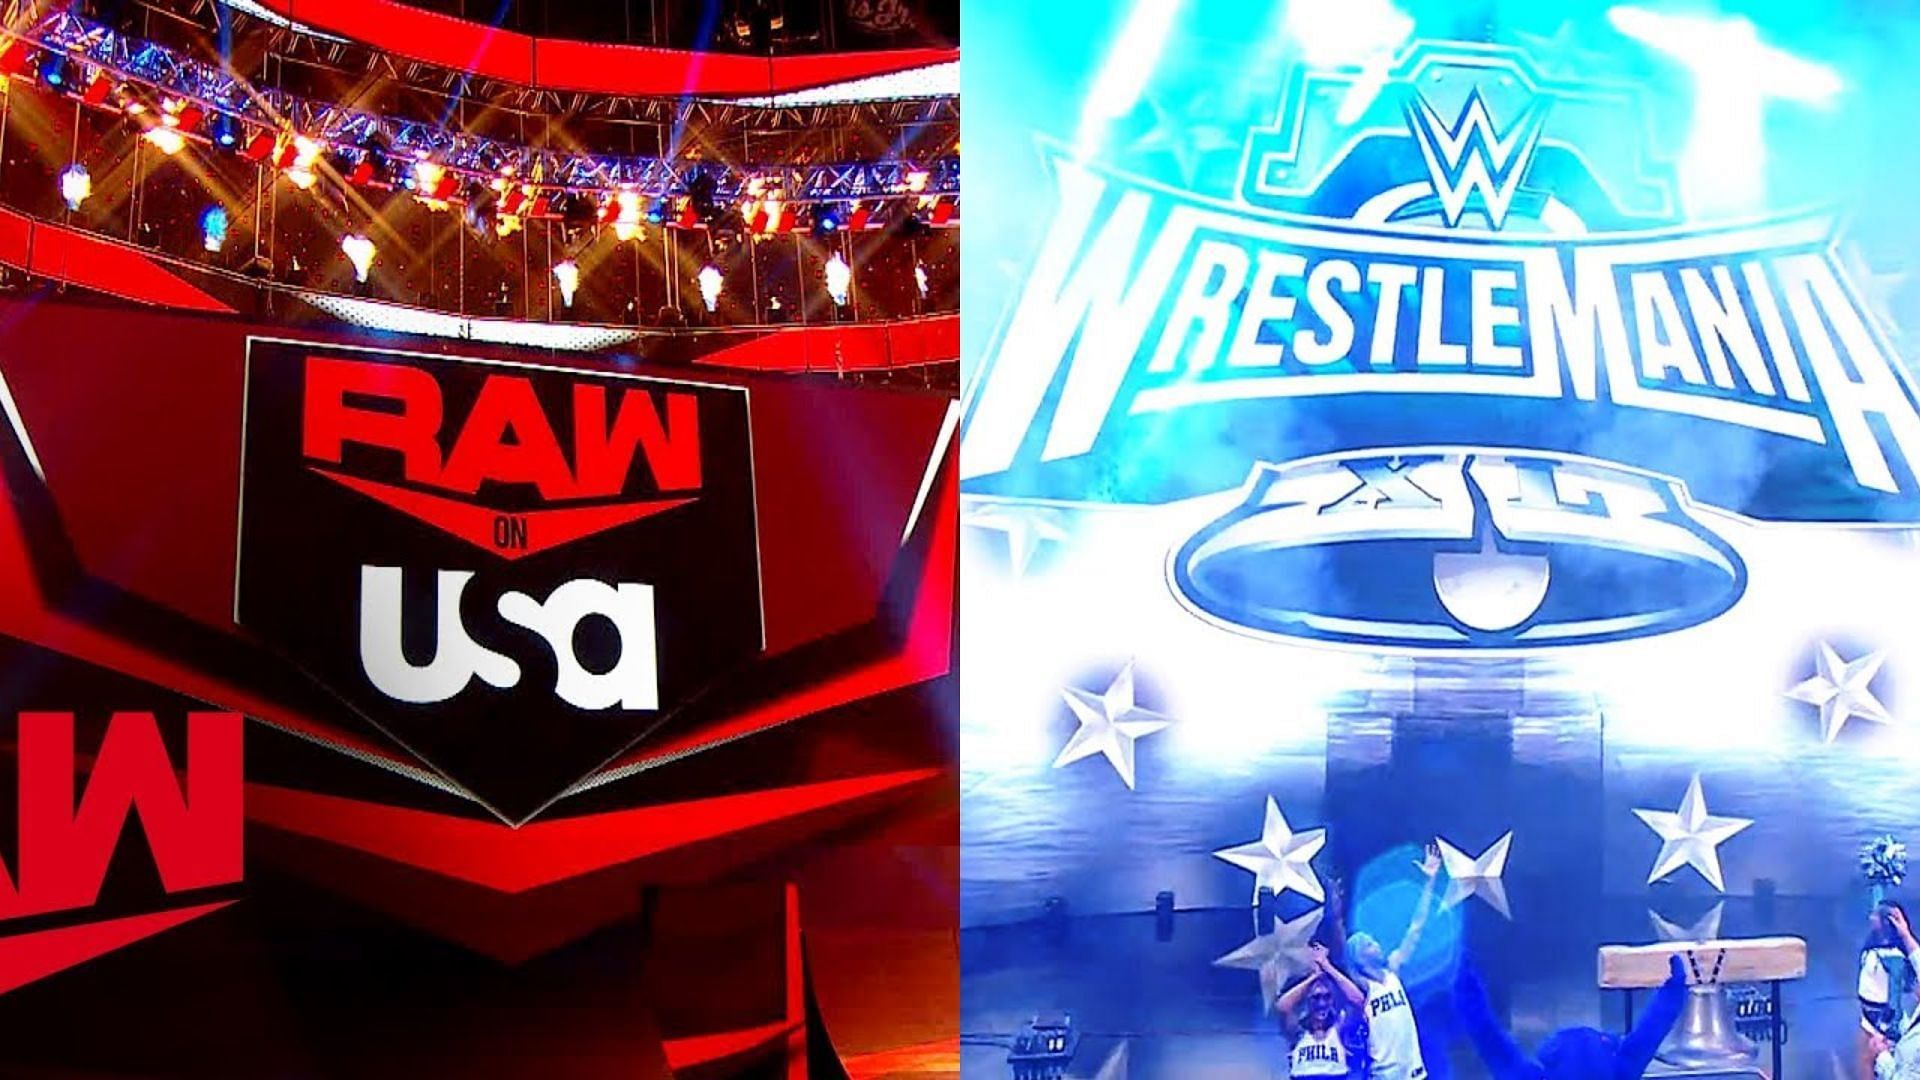 WWE aired the last episode of RAW before WrestleMania this week